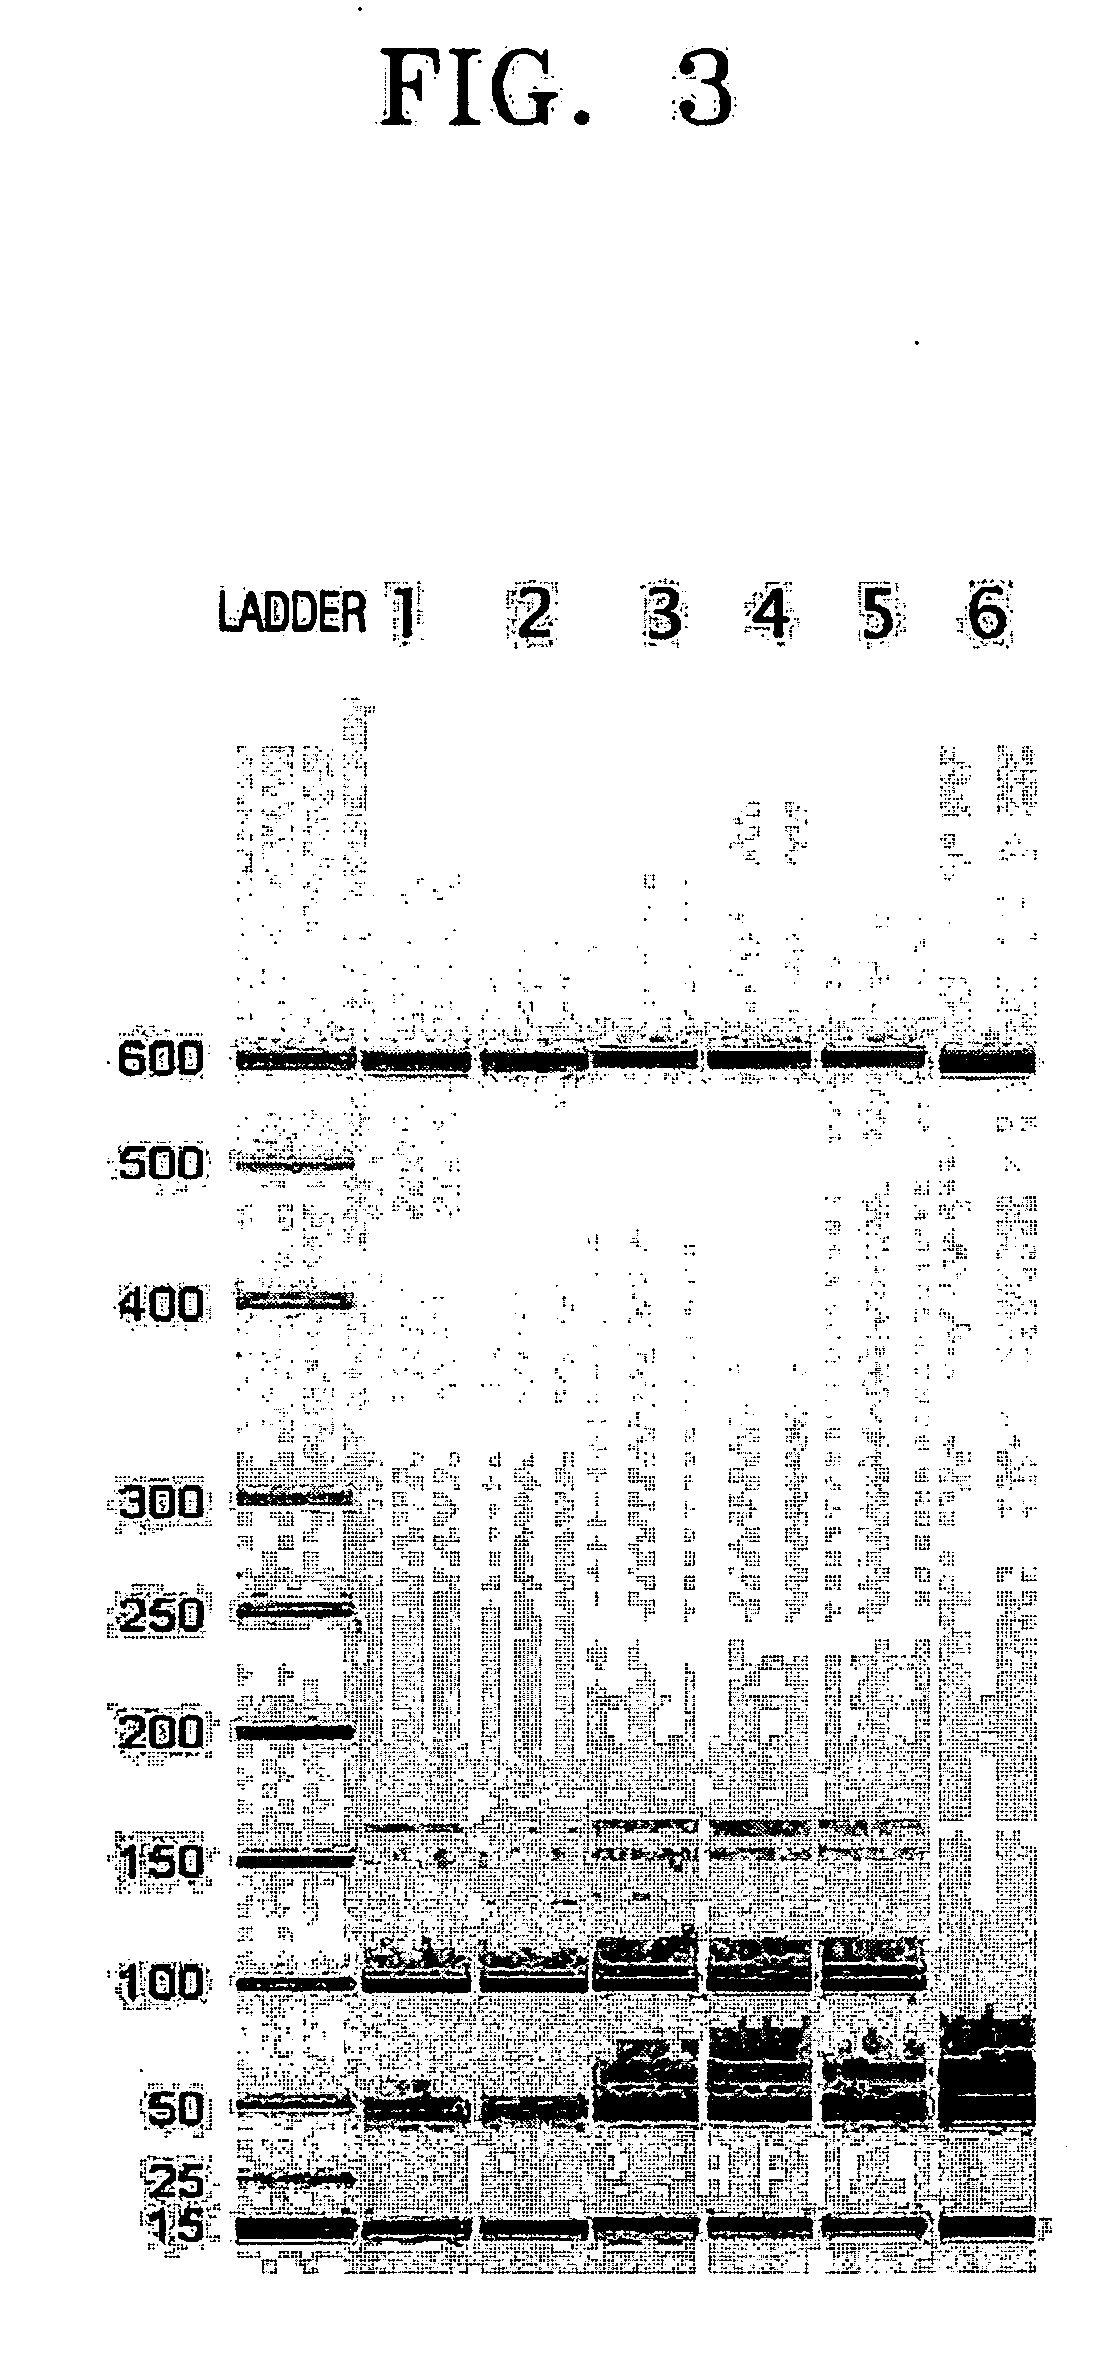 Apparatus for and method of purifying nucleic acids by different laser absorption of beads